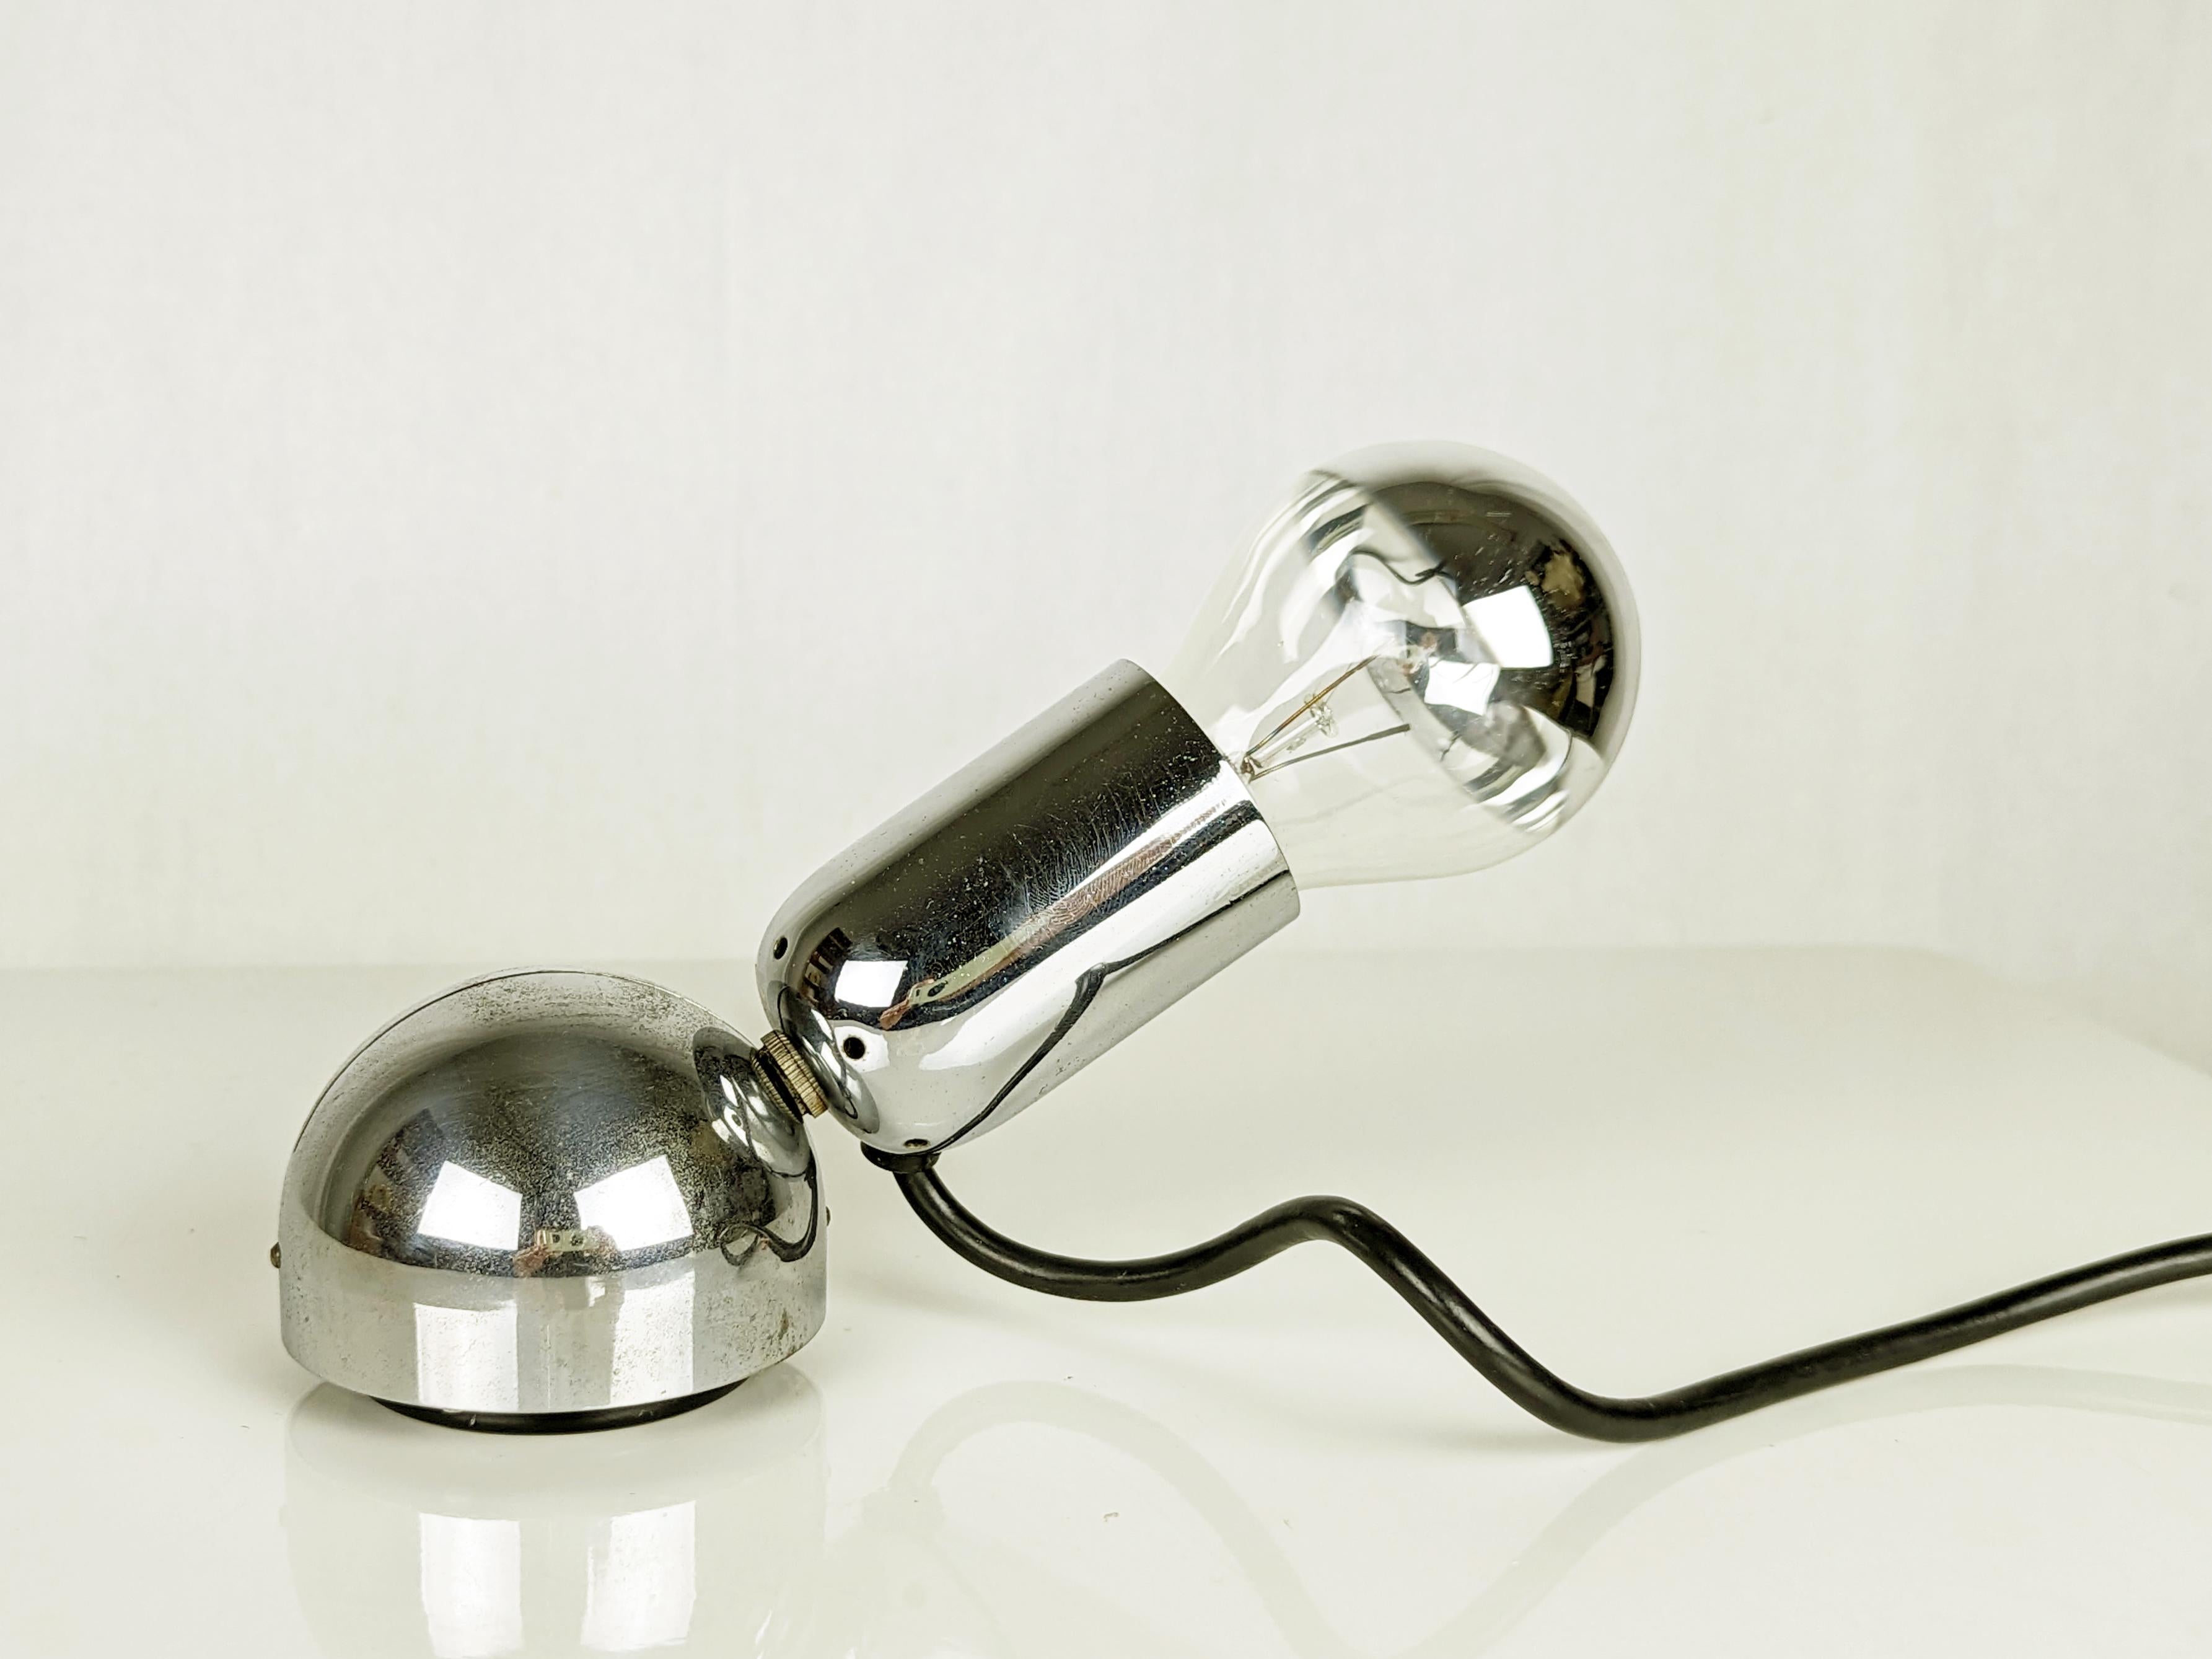 Chromed metal table lamp with tilting lamp body. Designed by Ingo Maurer for Design M.
E27 lamp holder. Dimensions: cm 12,5/19 (with bulb) x 7 diameter.
Good condition: signs of oxidation on the plating.